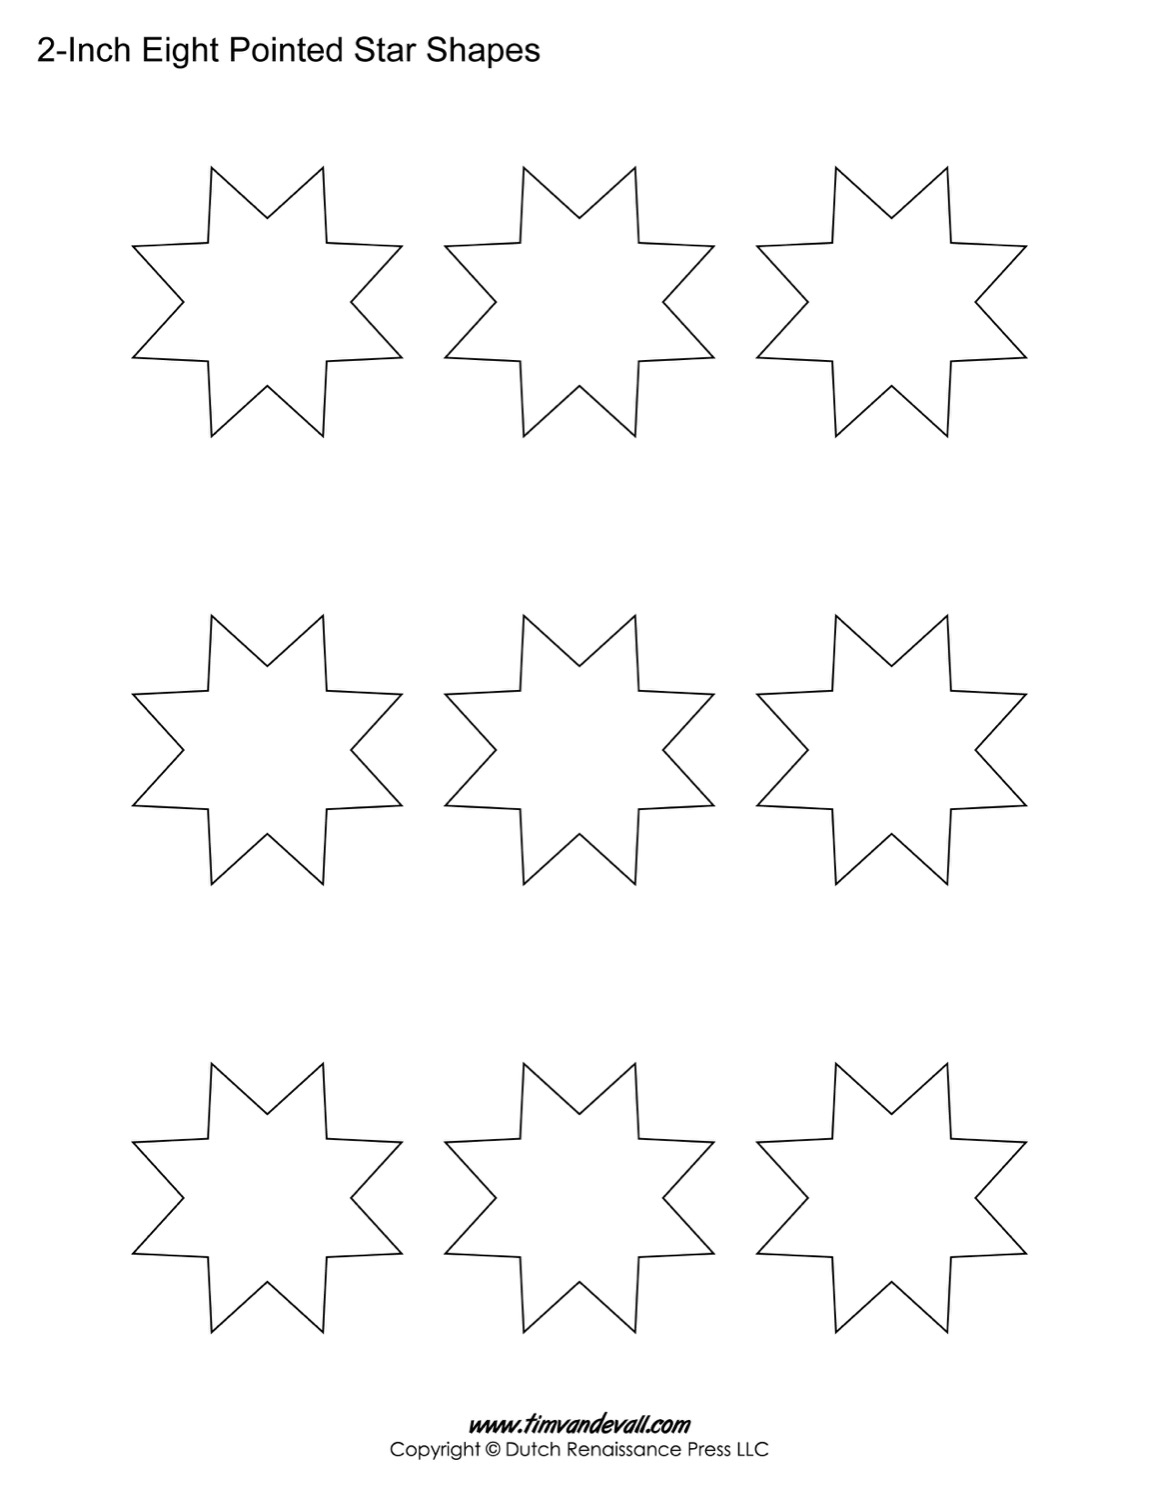 free-eight-pointed-star-shapes-blank-printable-shapes-for-kids